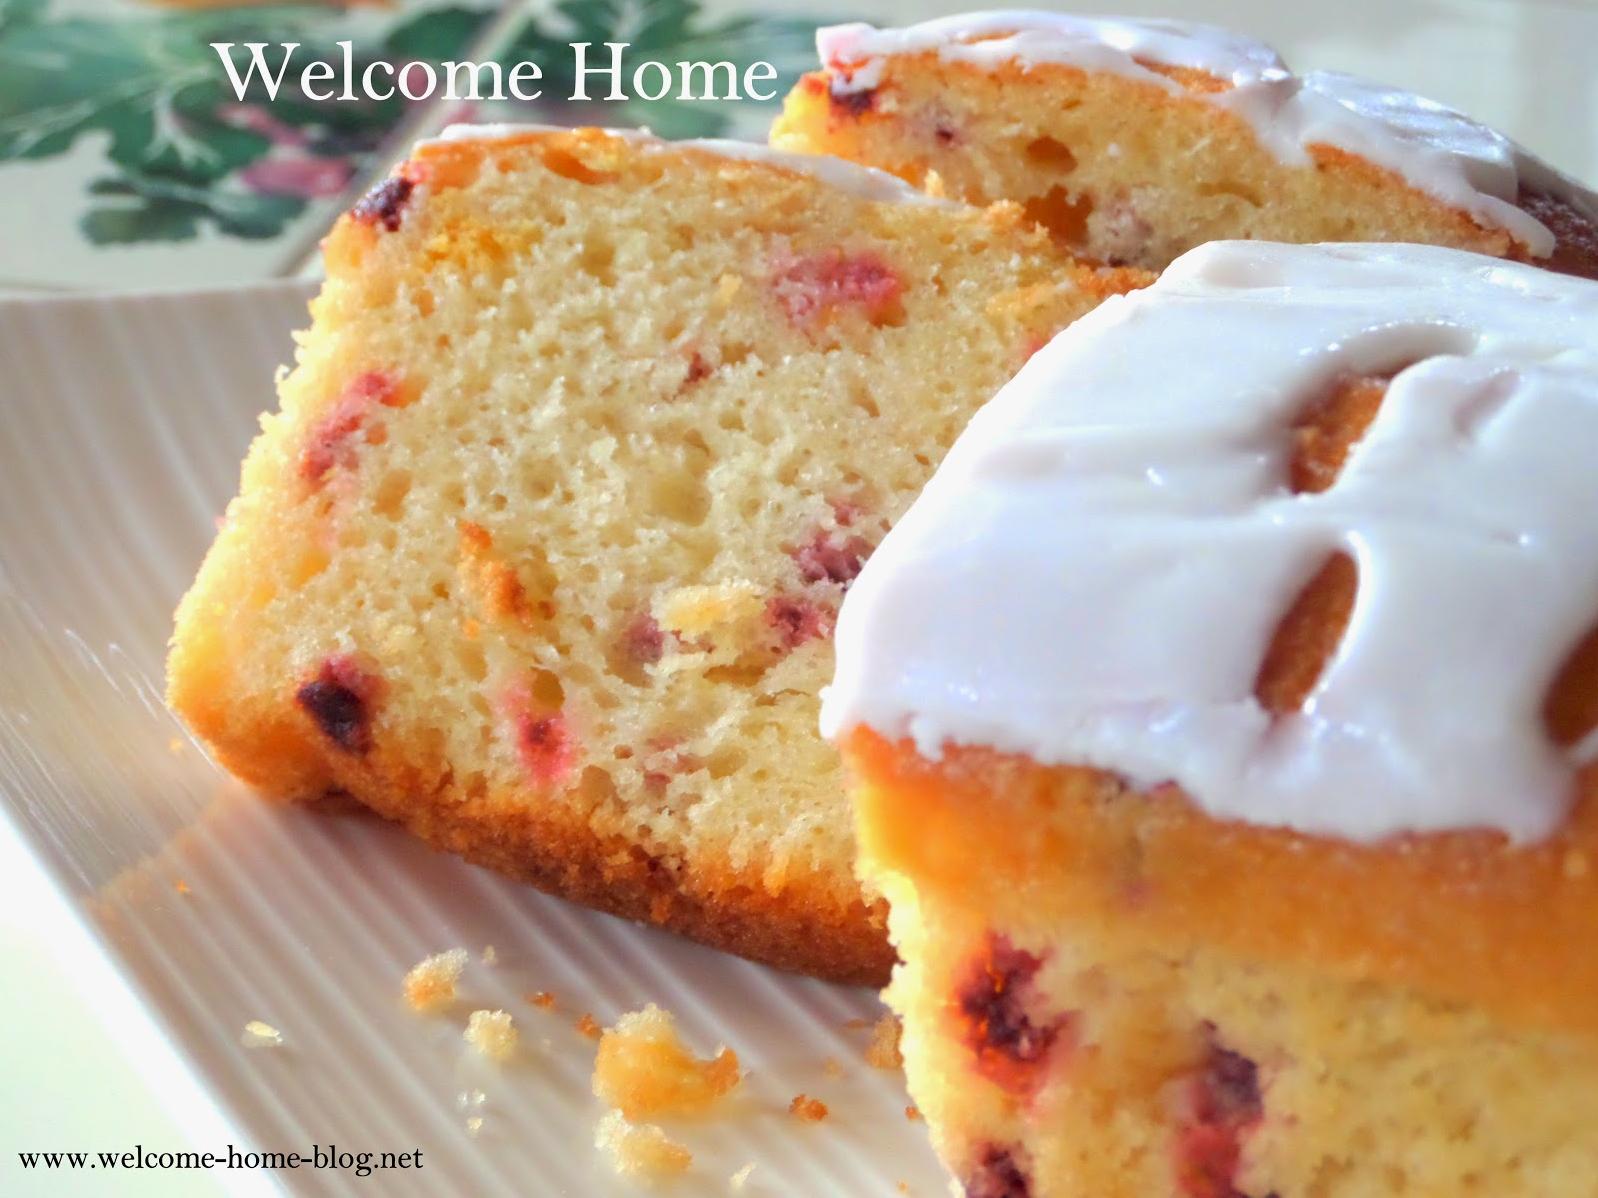  Each slice reveals a beautiful array of colors with the blueberries and peaches bursting with flavor.